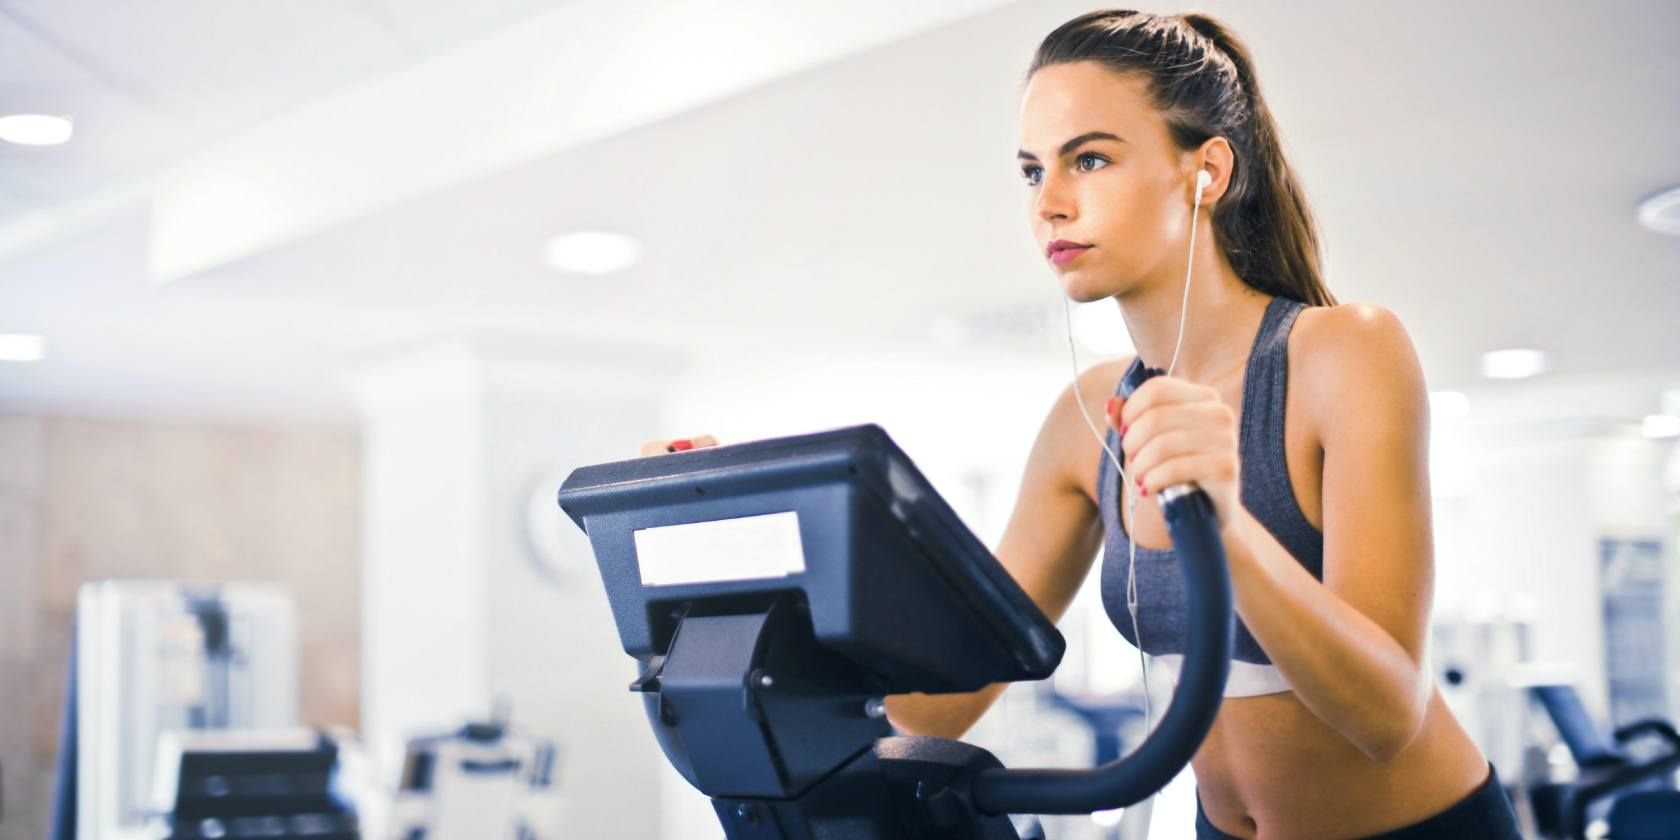 Cardio workouts on an indoor cycle